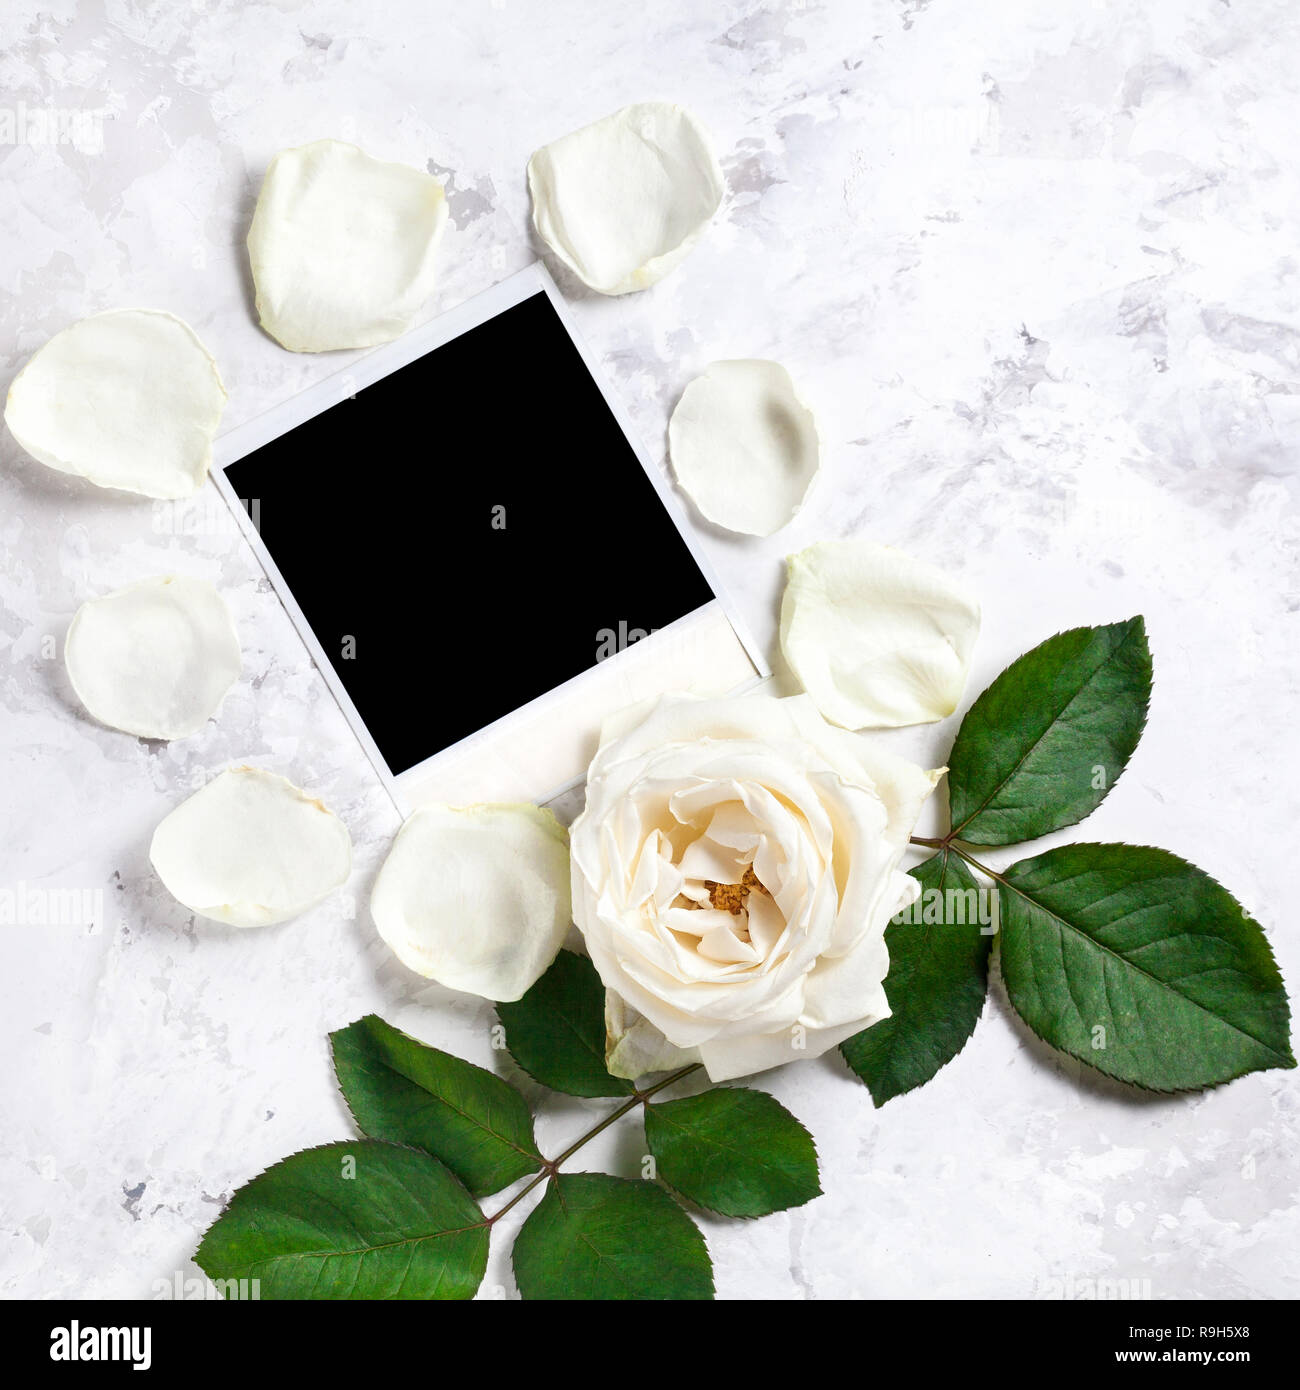 Blank photo frame near white rose and petals on white marble background Stock Photo